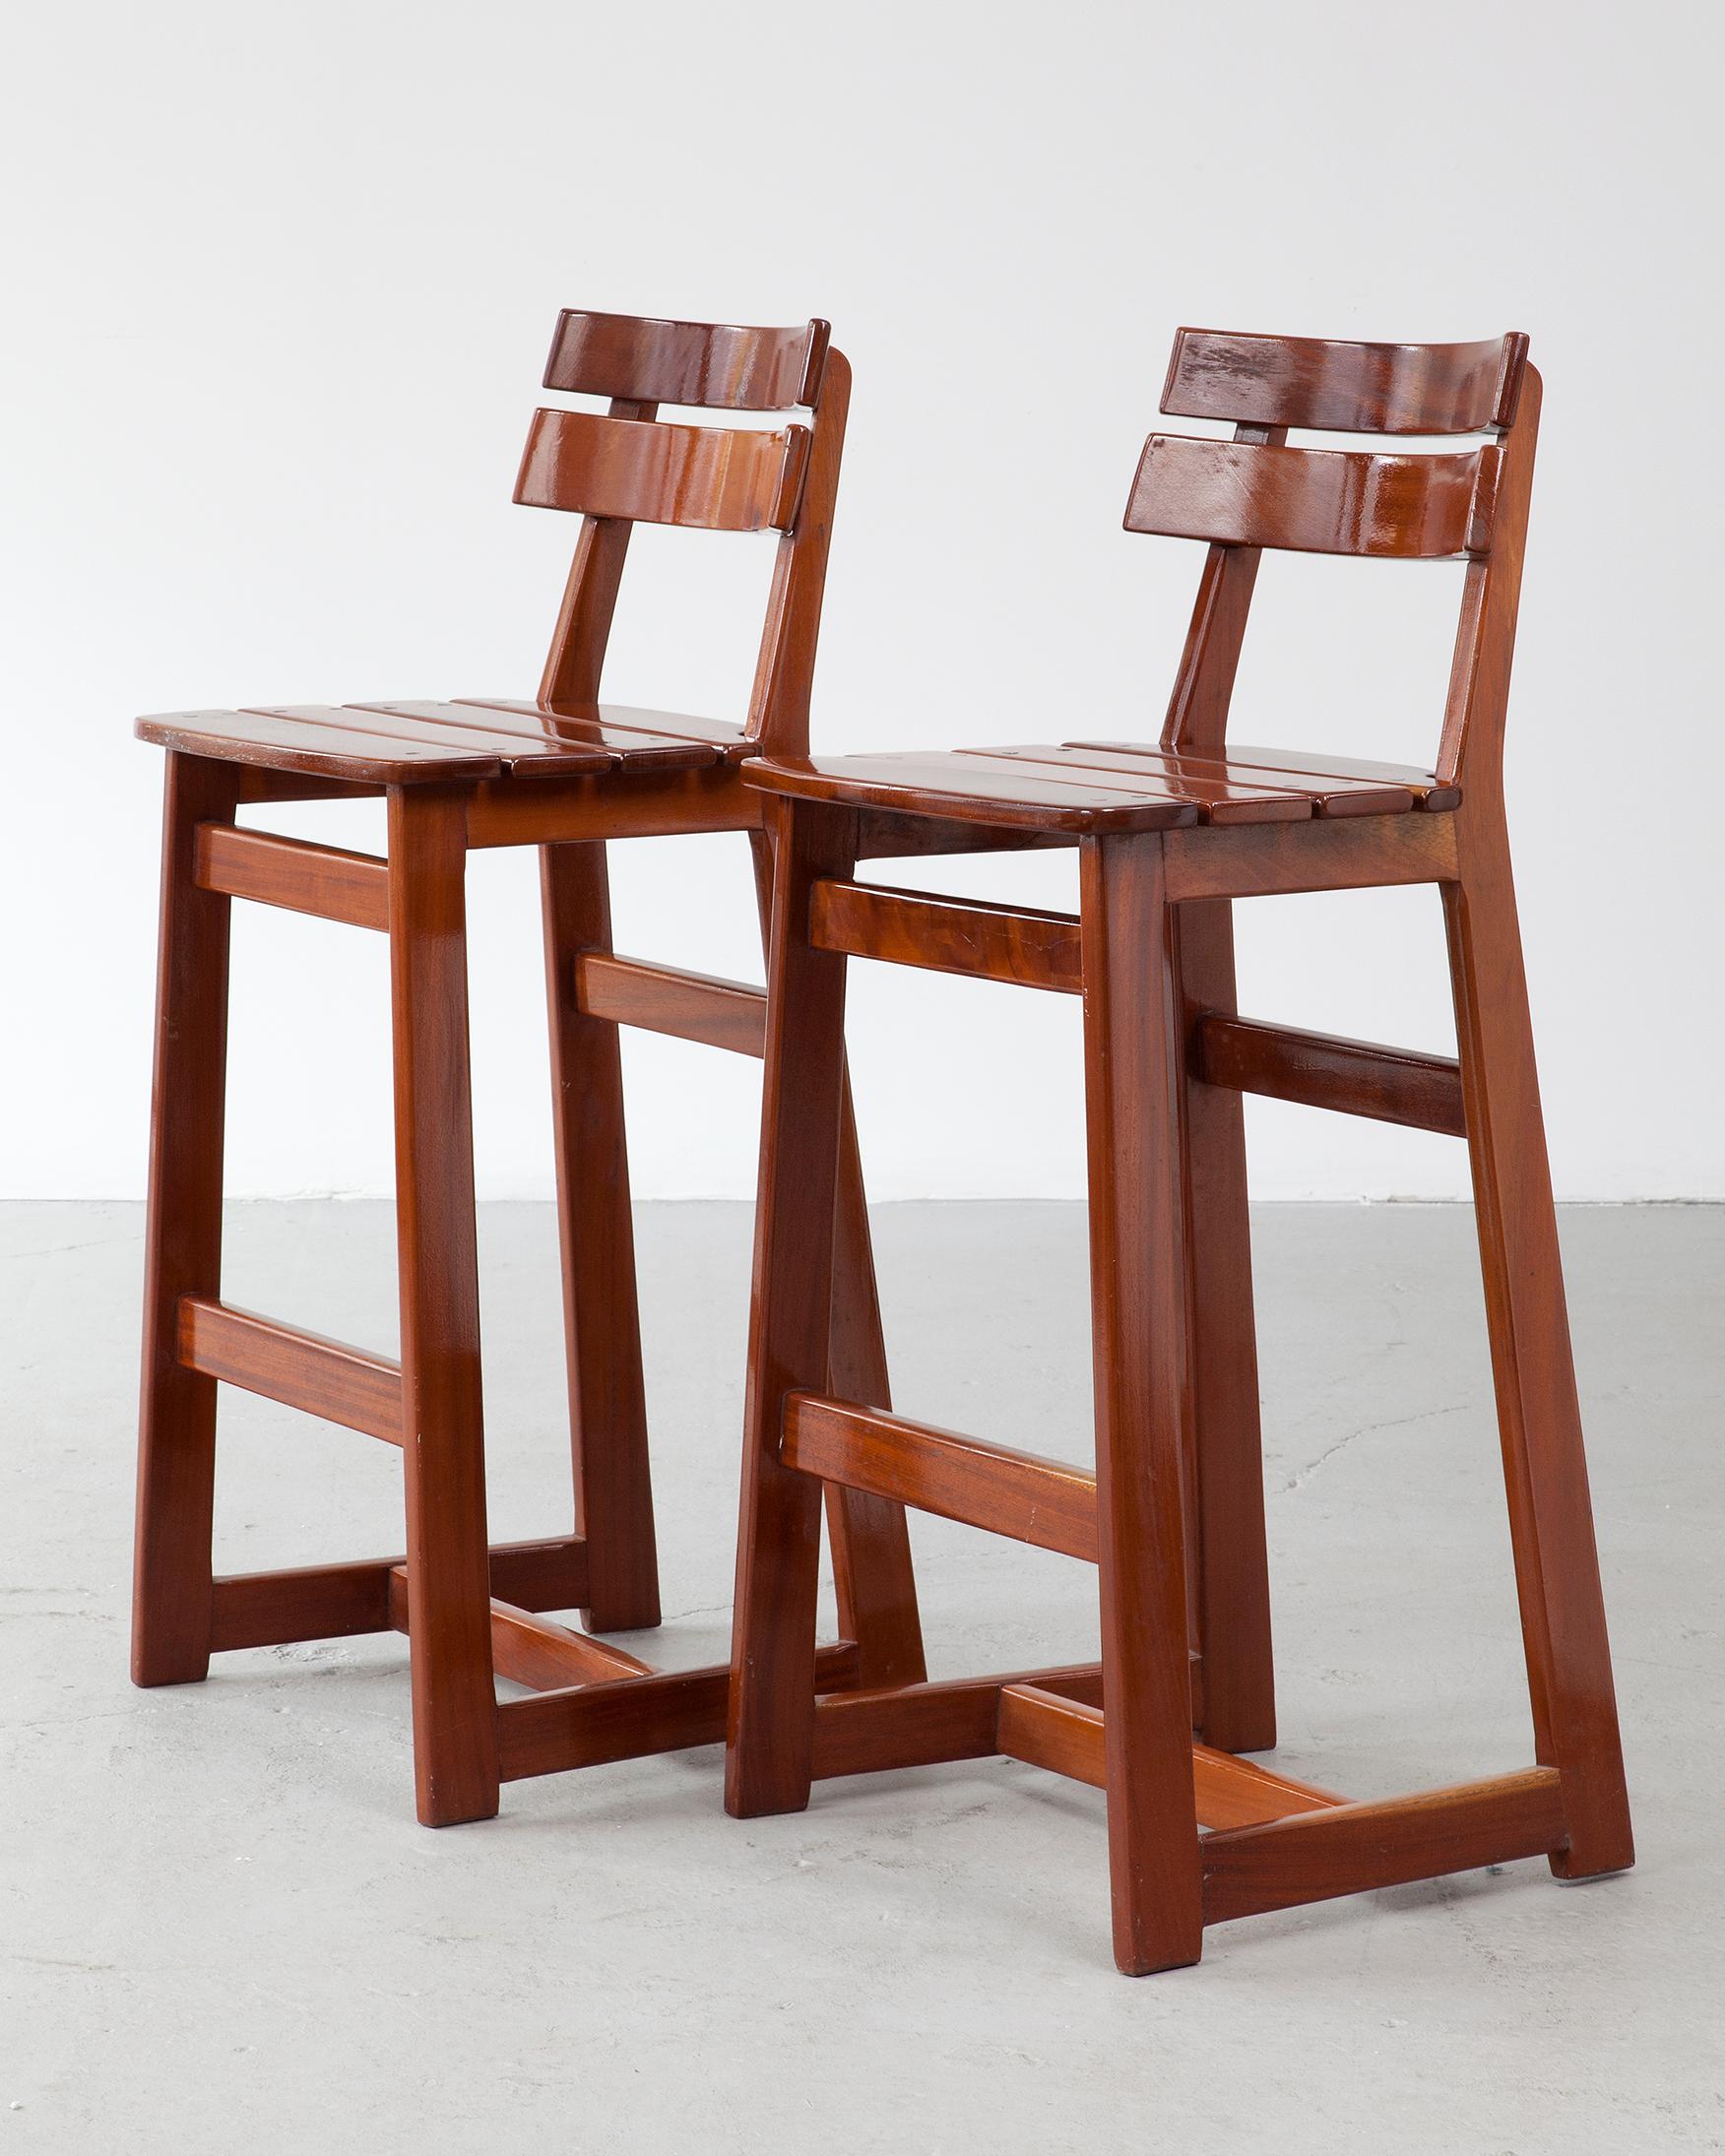 Pair of barstools in Brazilian Mahogany with slatted seats and backrests. Designed by Sérgio Rodrigues, Brazil, 1978.